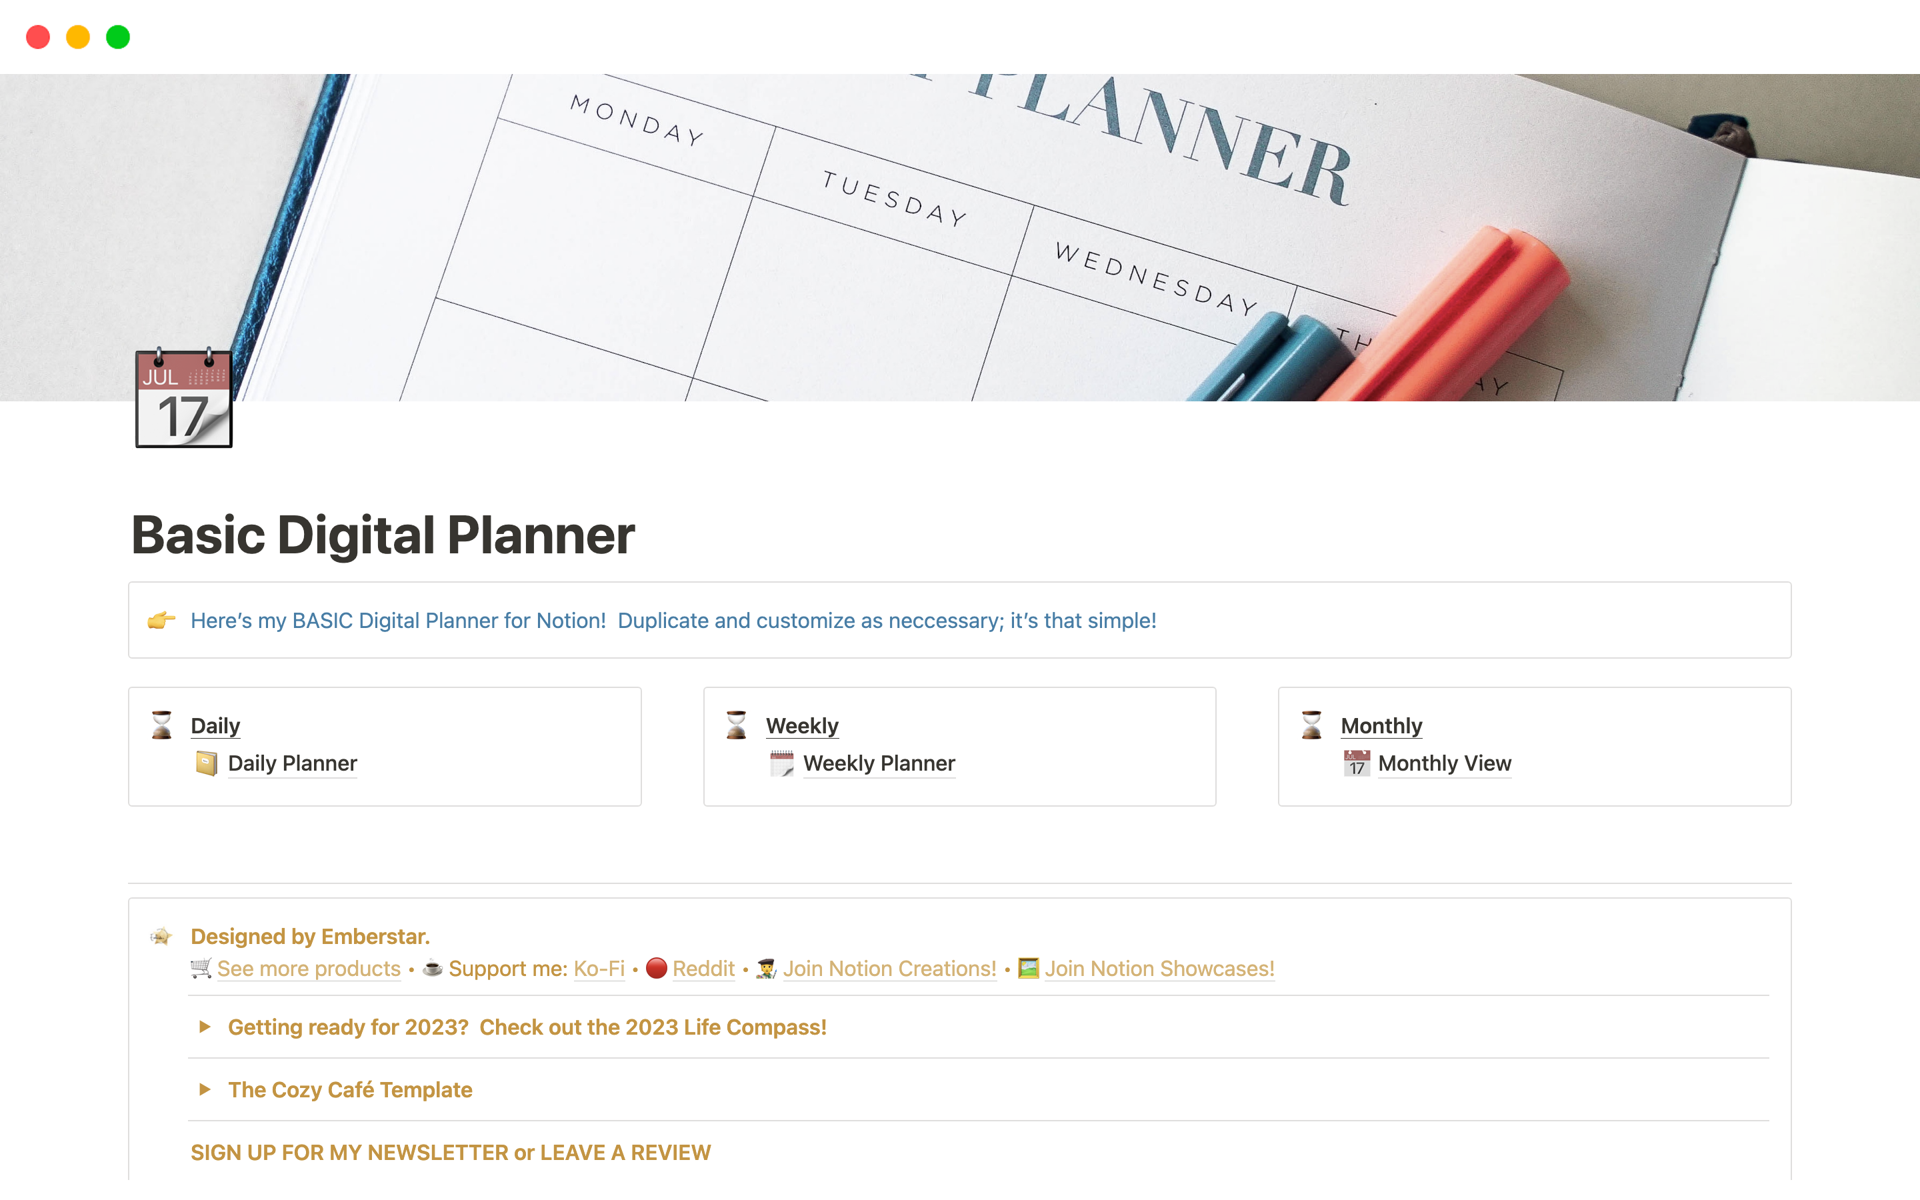 This Digital Planner Template is complete with Daily, Weekly, and Monthly views.